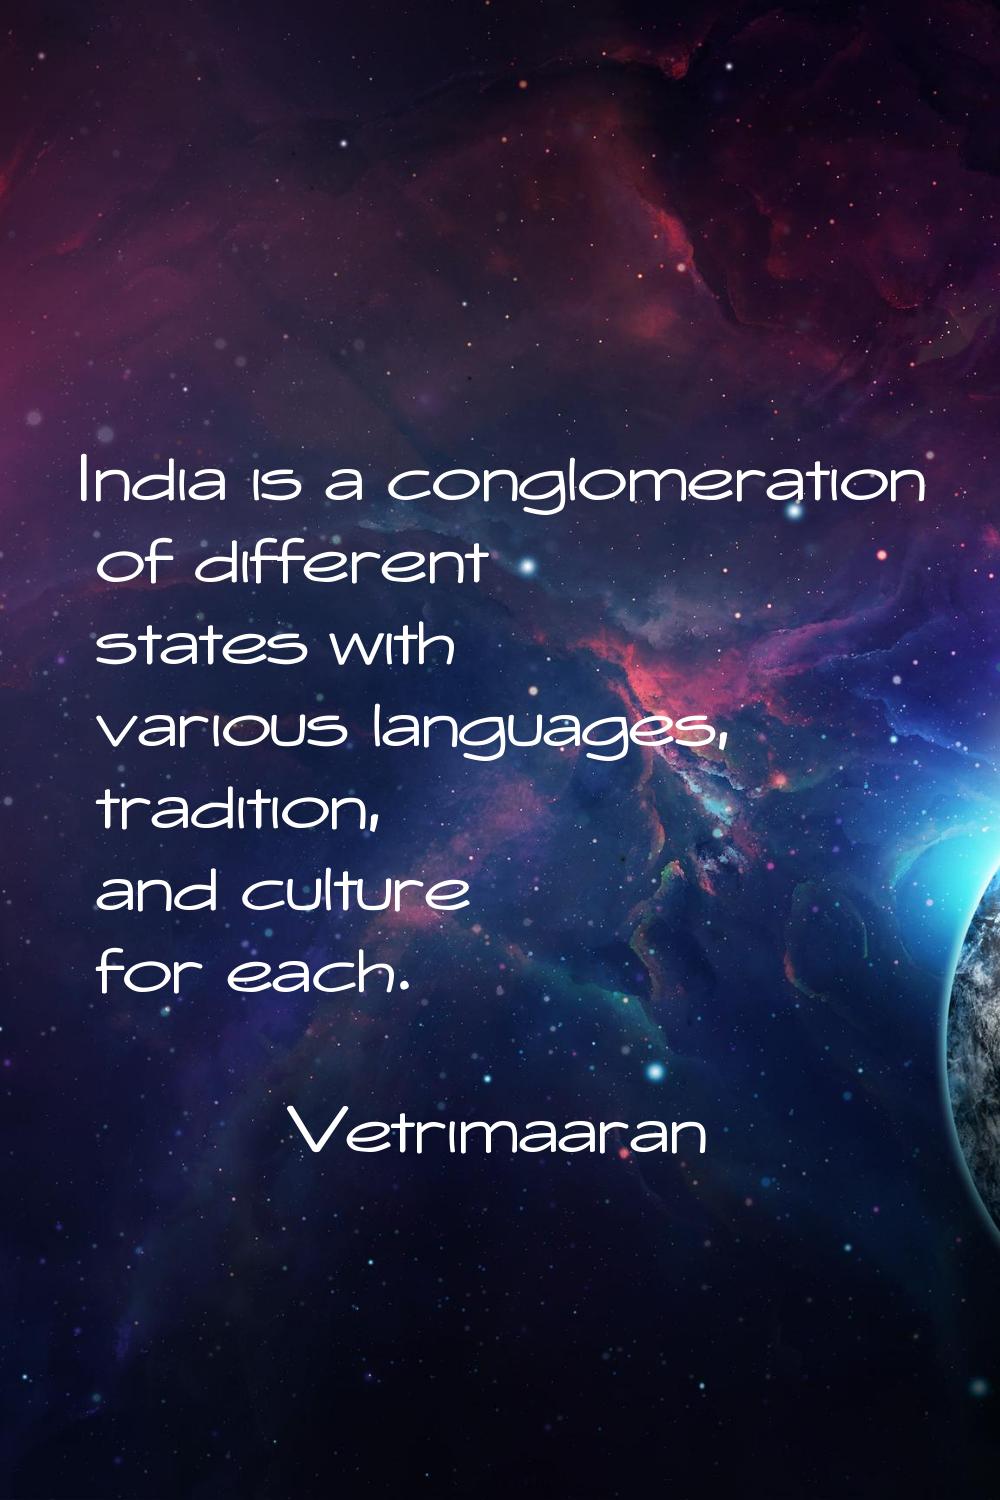 India is a conglomeration of different states with various languages, tradition, and culture for ea